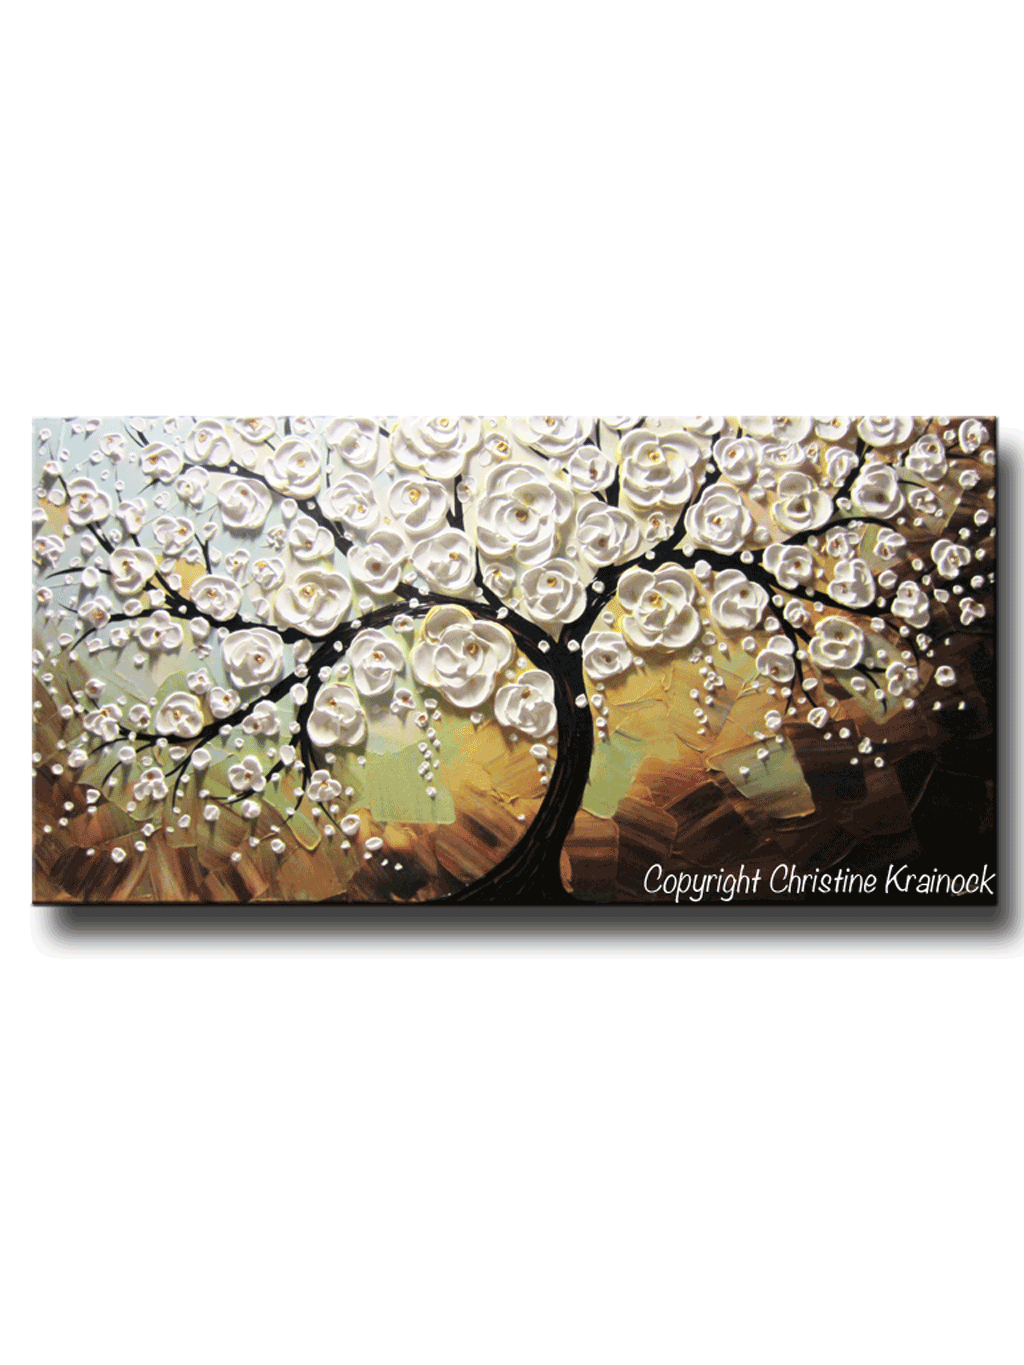 Load image into Gallery viewer, ORIGINAL Art Abstract Painting White Cherry Tree Flower Blossoms Large Fine Art Textured Palette Knife - Christine Krainock Art - Contemporary Art by Christine - 1
